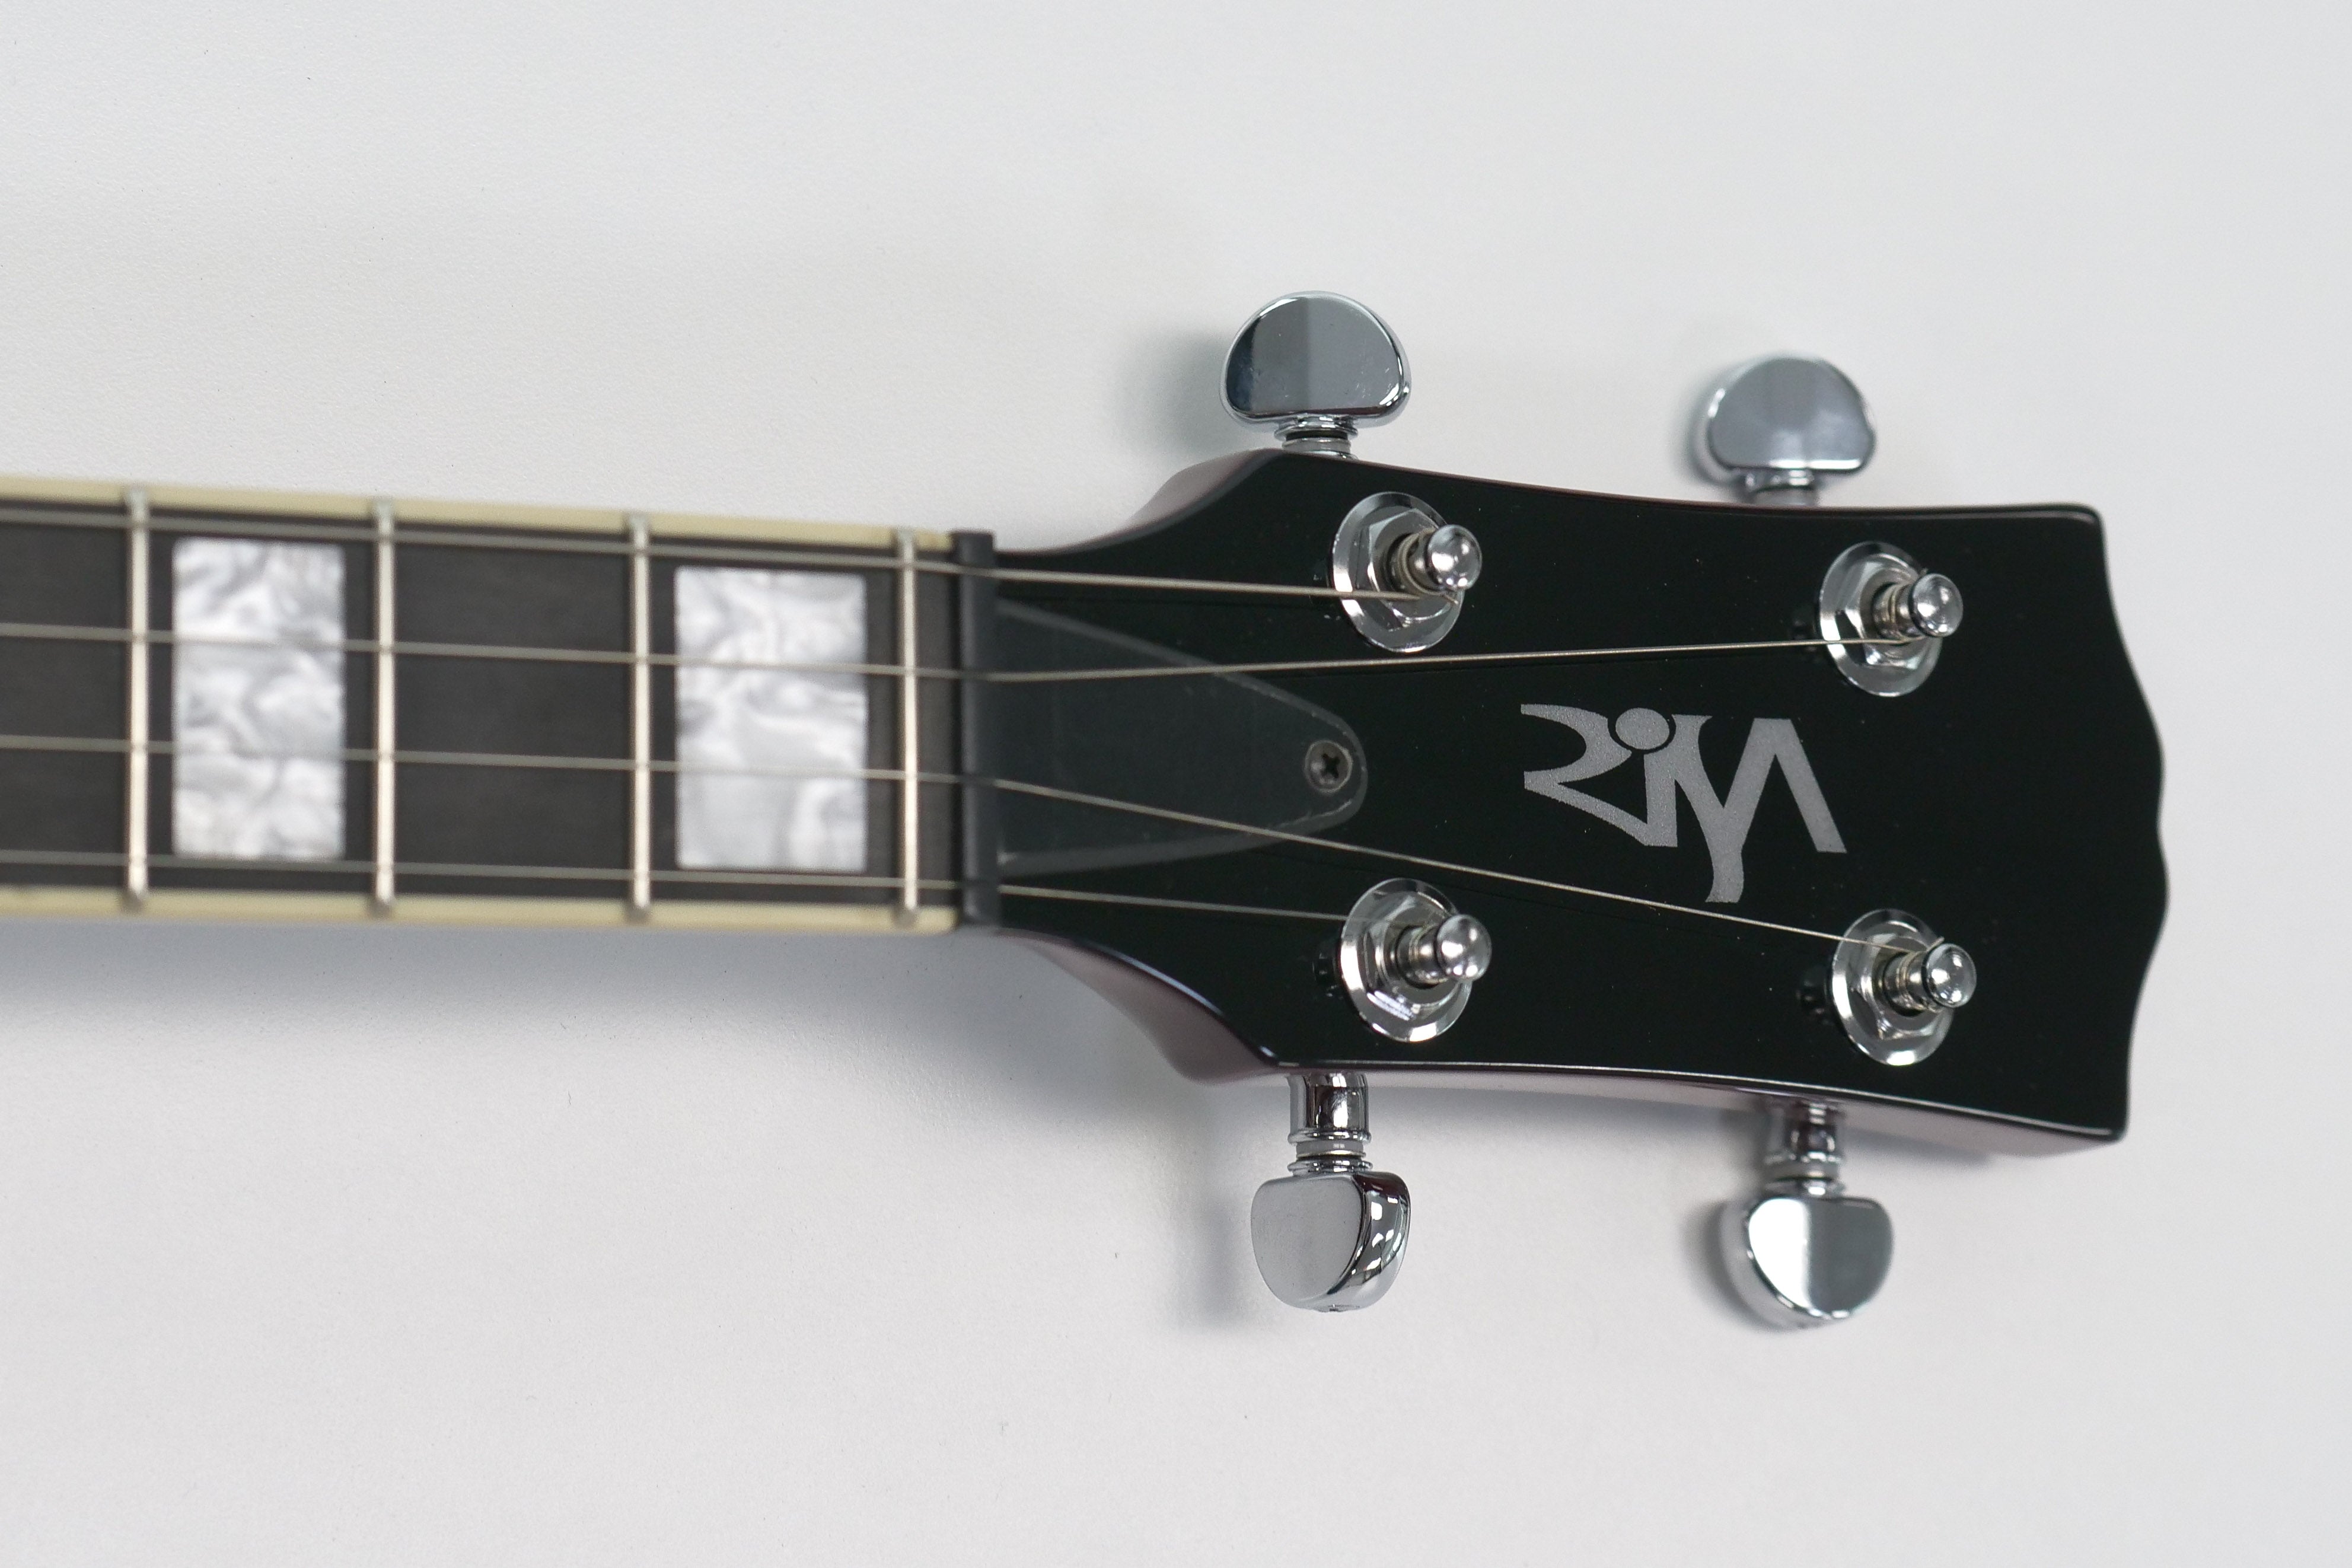 risa logo on front of headstock